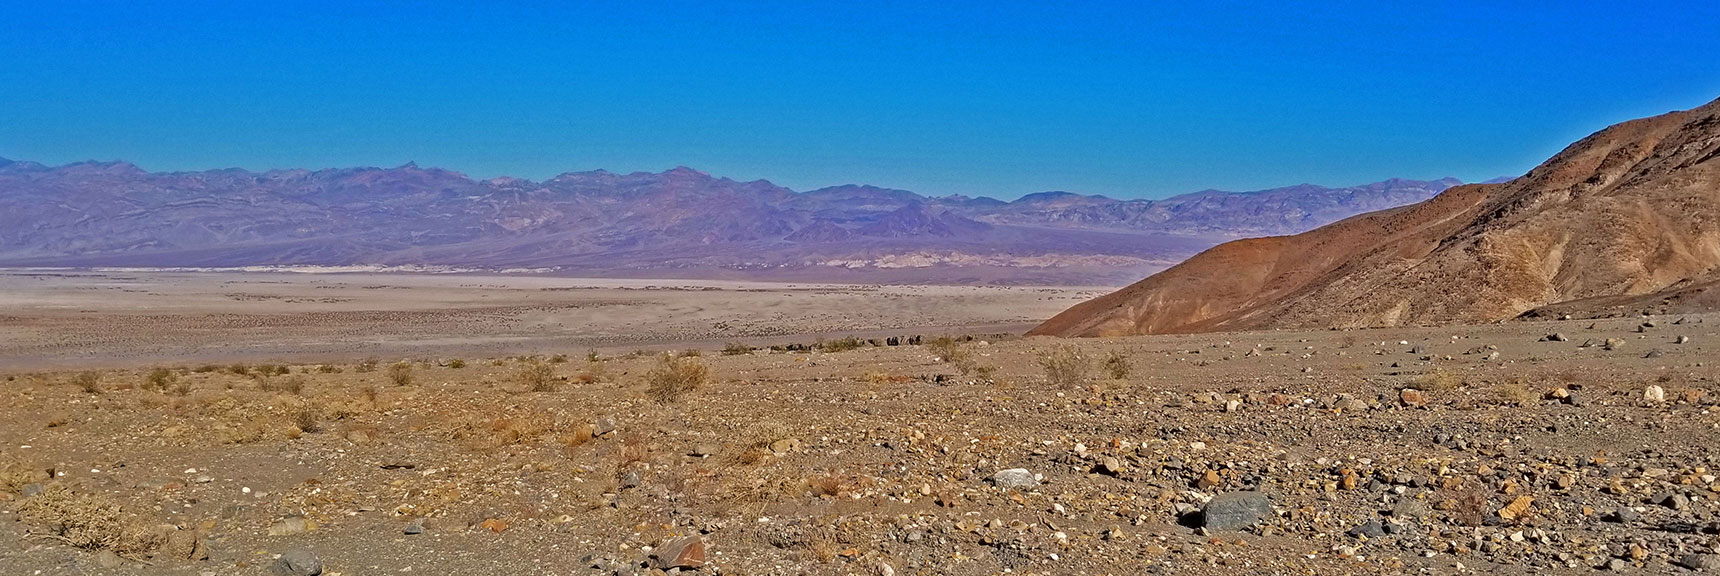 View of Mountains East of Mosaic Canyon Road | Mosaic Canyon, Above Stovepipe Wells, Death Valley National Park, California